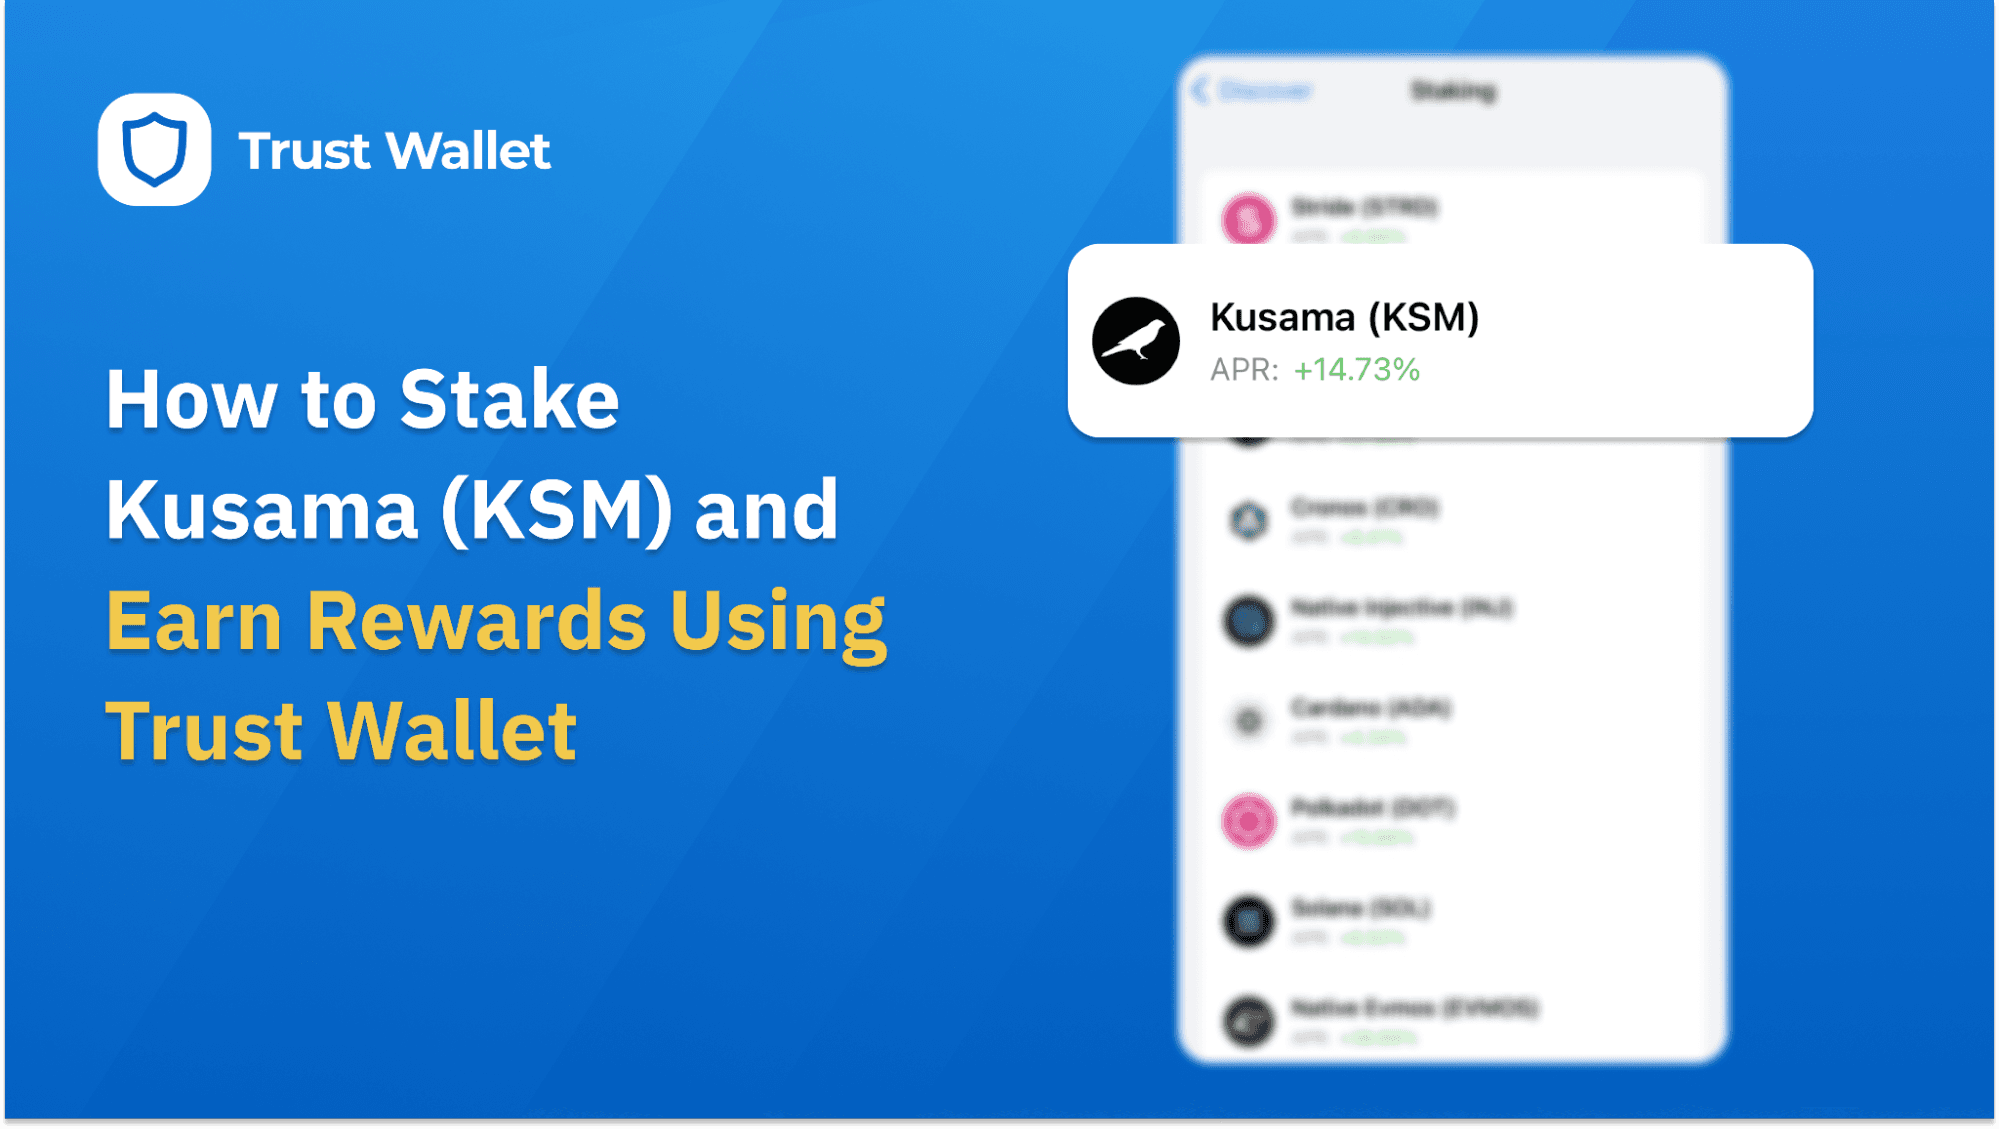 How to Stake Kusama (KSM) and Earn Rewards Using Trust Wallet